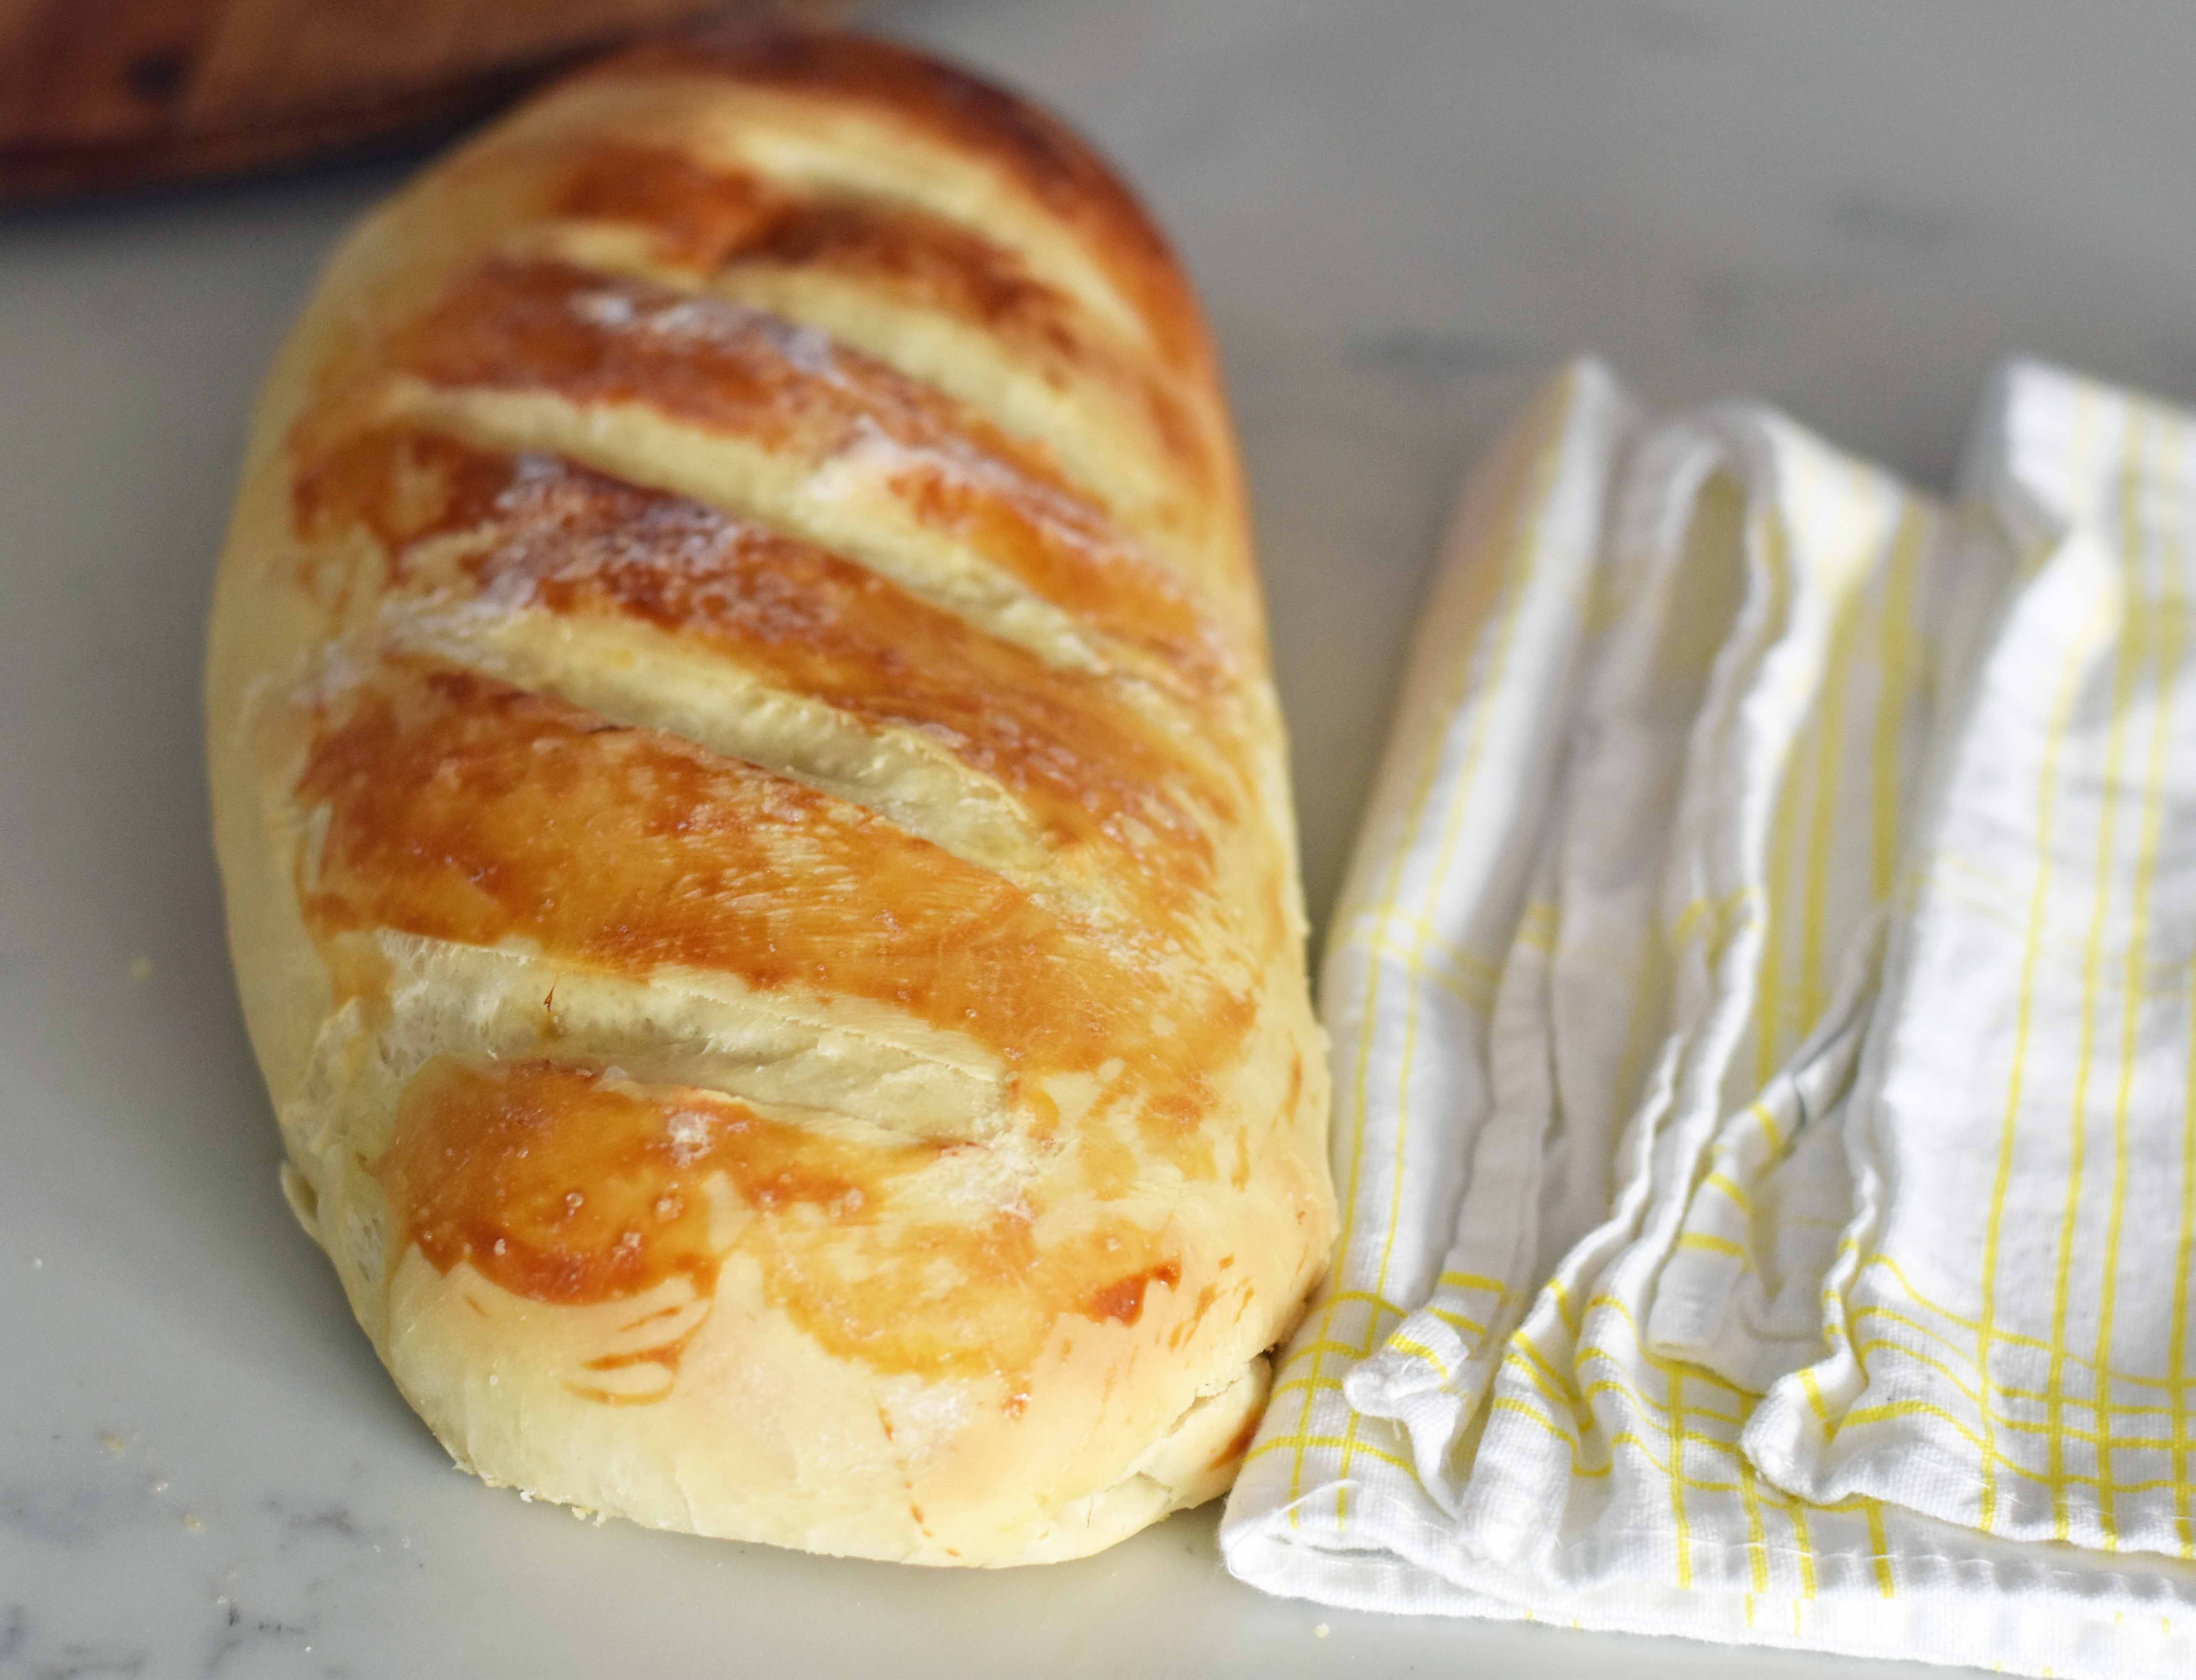 Easy Homemade Bakery French Bread. Quick and easy homemade french bread made at home. Kids can make this bread! Super easy to follow foolproof recipe. www.modernhoney.com